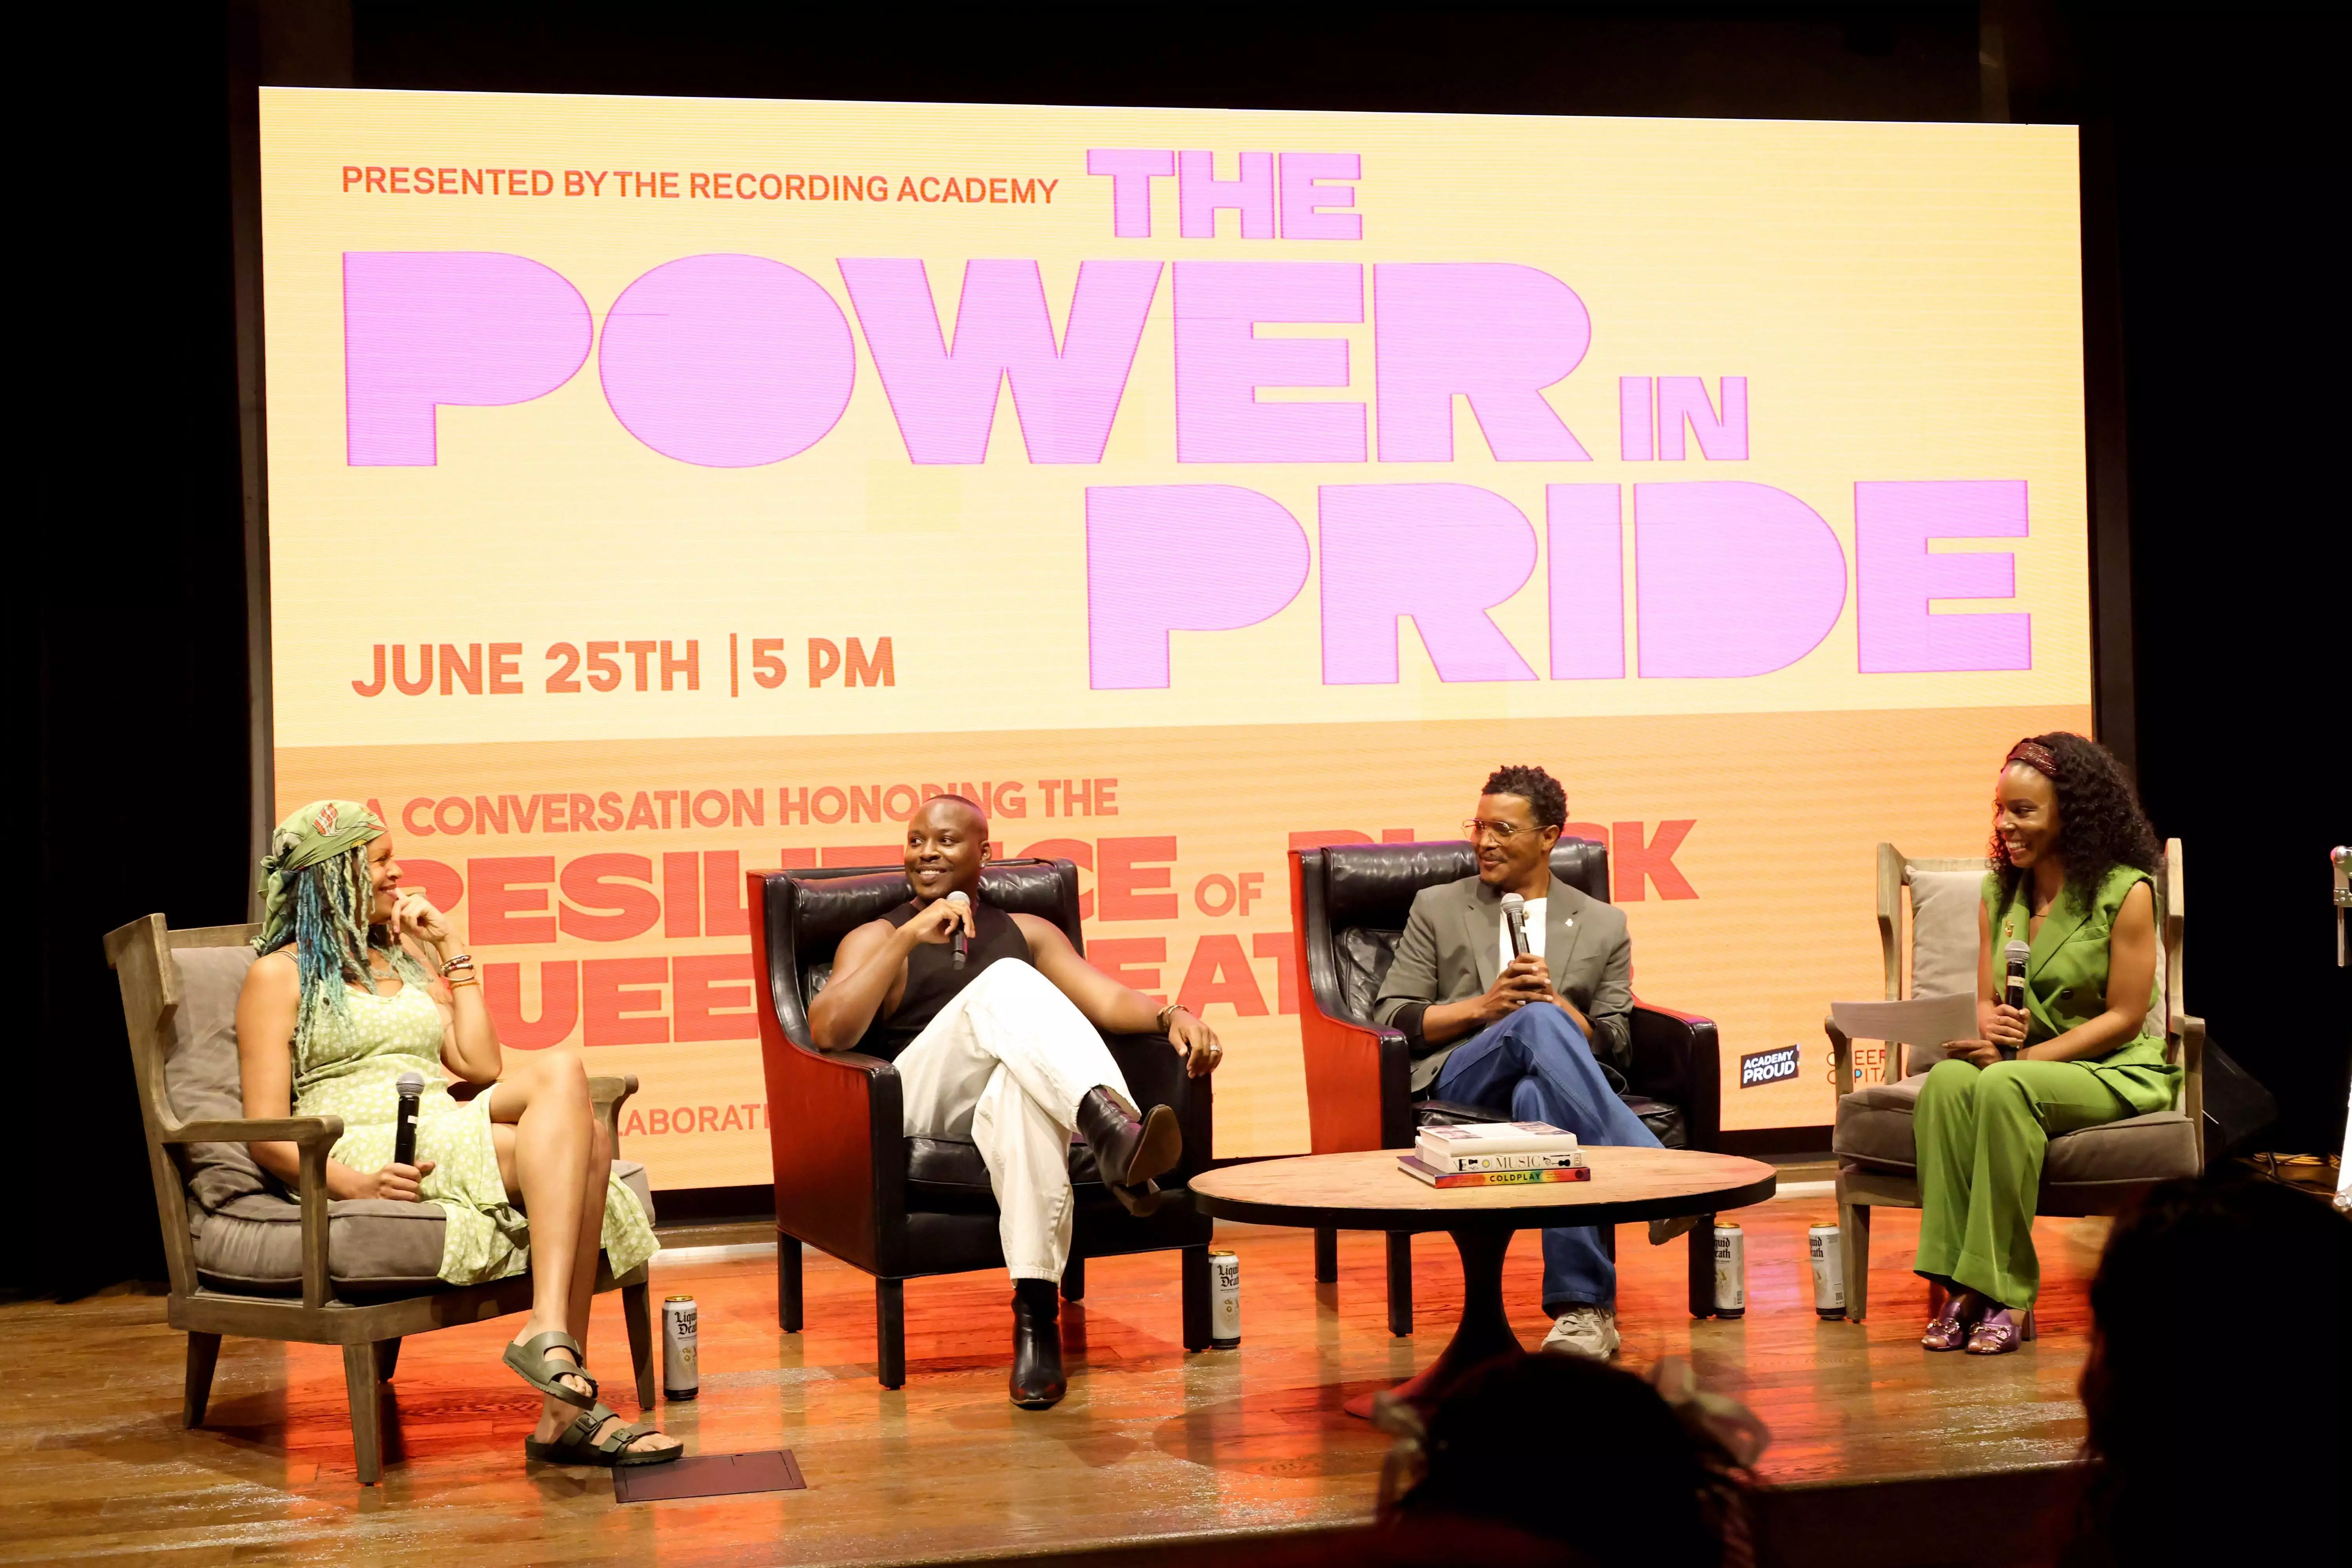 The Power In Pride: A Conversation Honoring The Resilience Of Black Queer Creatives With A Candid, Intersectional Discussion For Pride Month